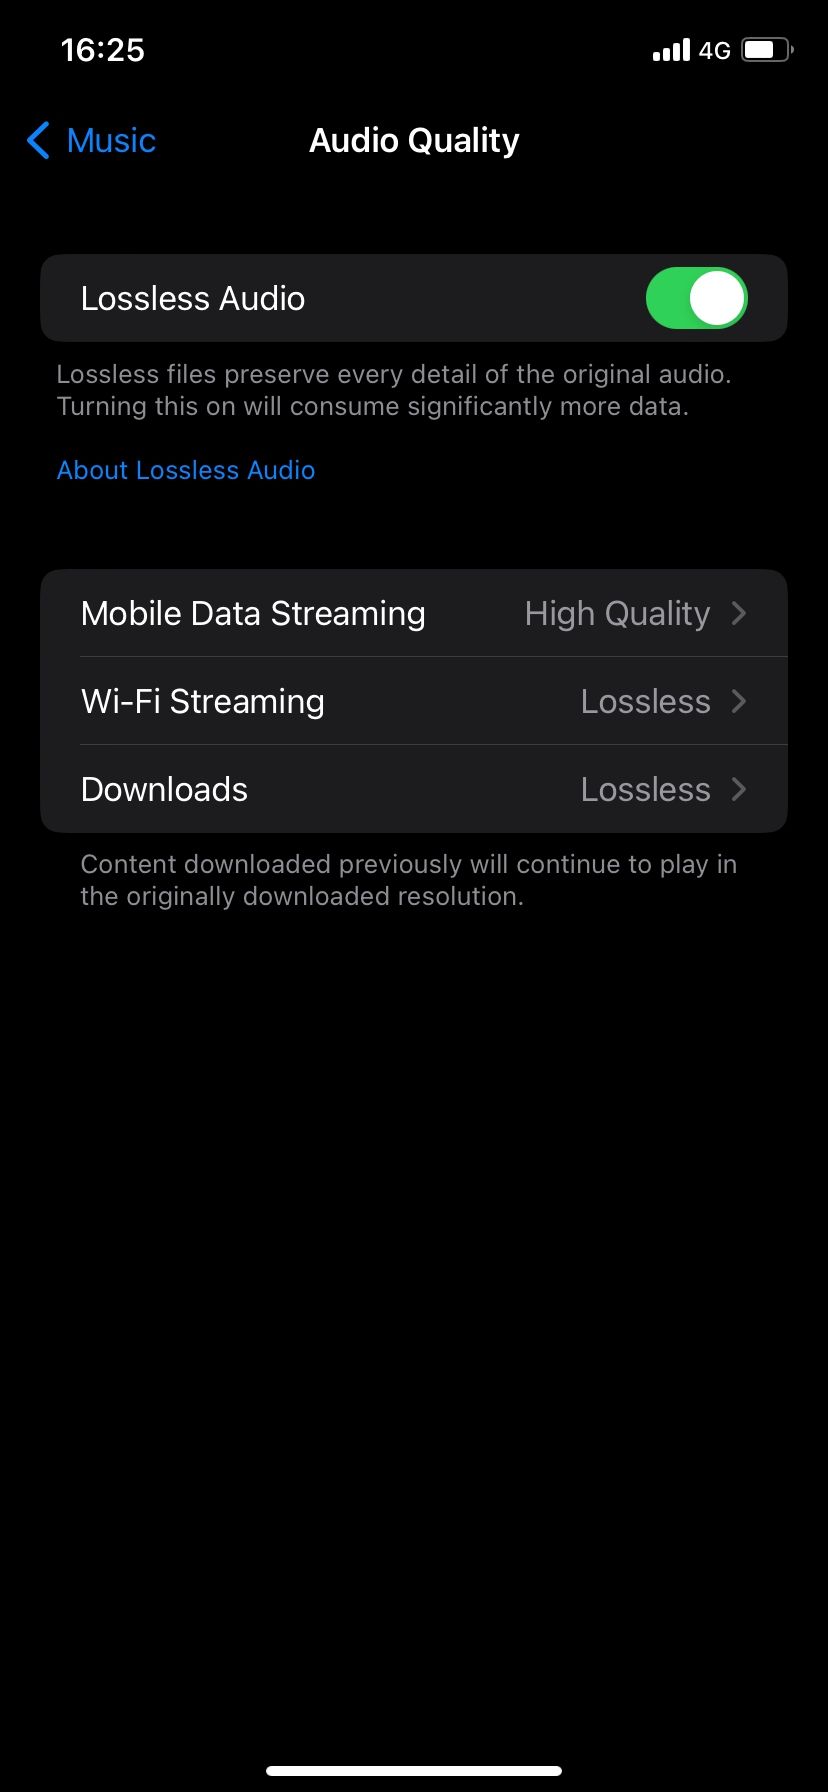 Audio quality settings page on Apple Music